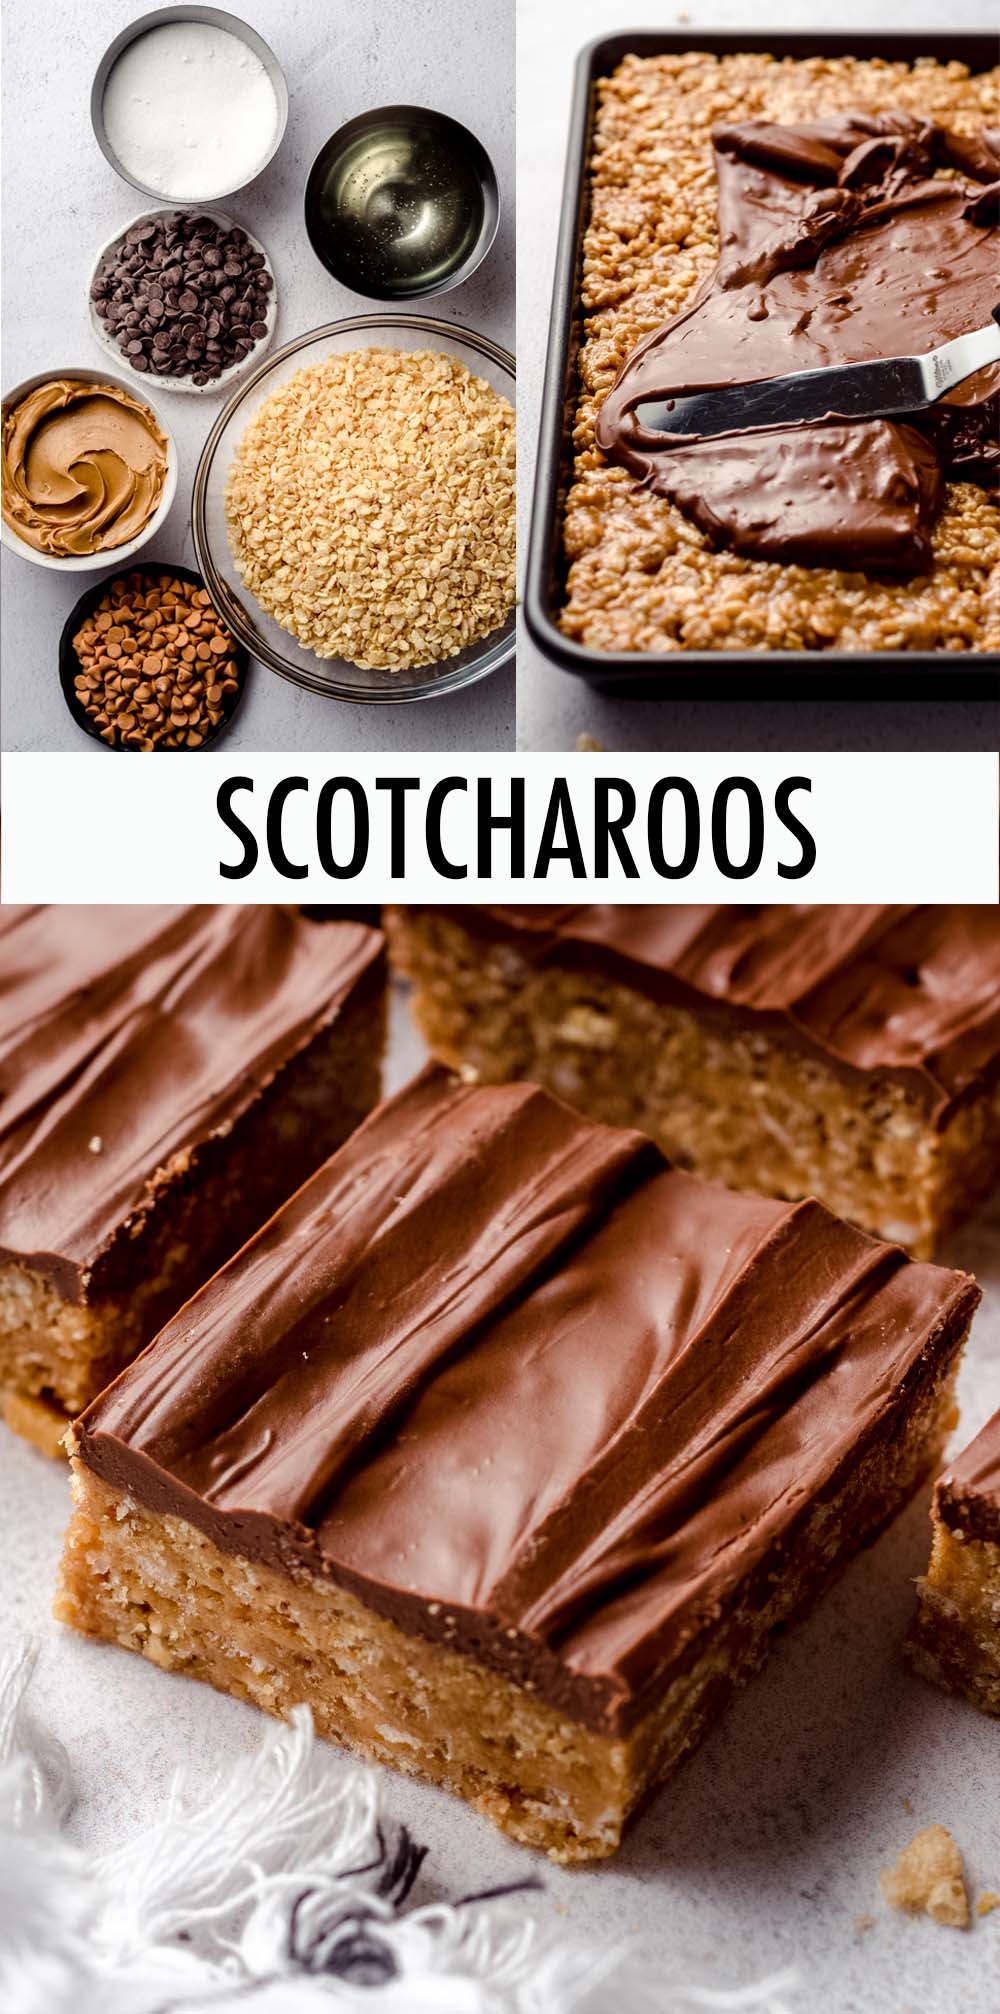 This scotcharoos recipe features a soft and chewy peanut butter crispy rice cereal base that gets smothered with a smooth and creamy chocolate butterscotch topping. via @frshaprilflours